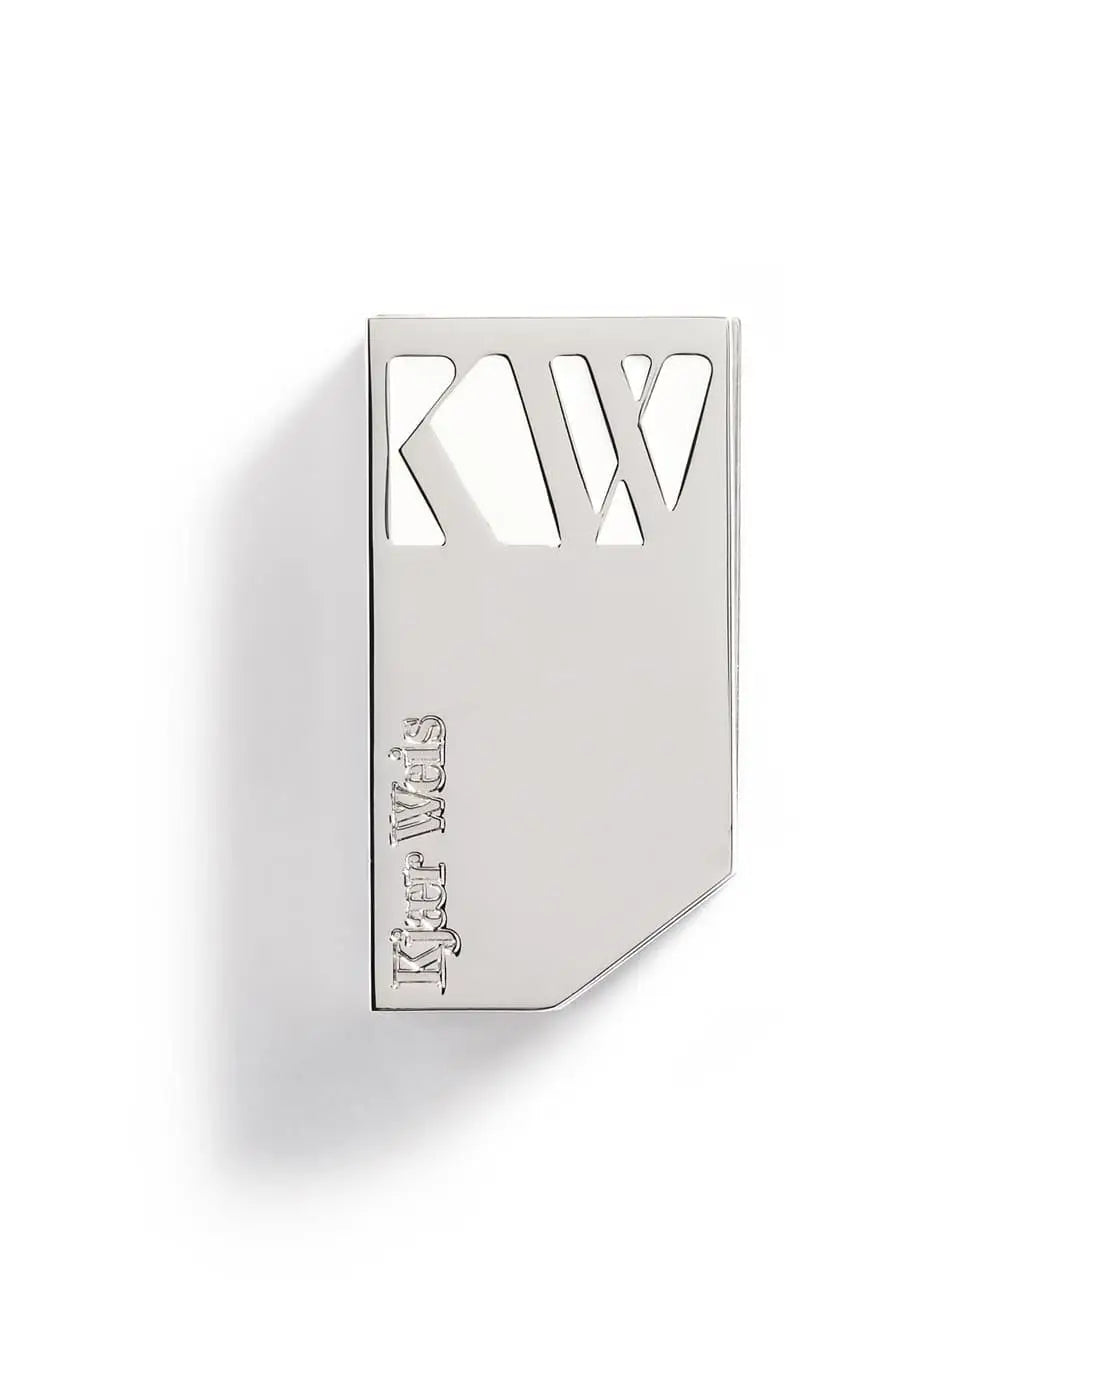 Kjaer Weis Iconic Edition  Case for  Lip Tint - Kjaer Weis Iconic Edition  Case for  Lip Tint